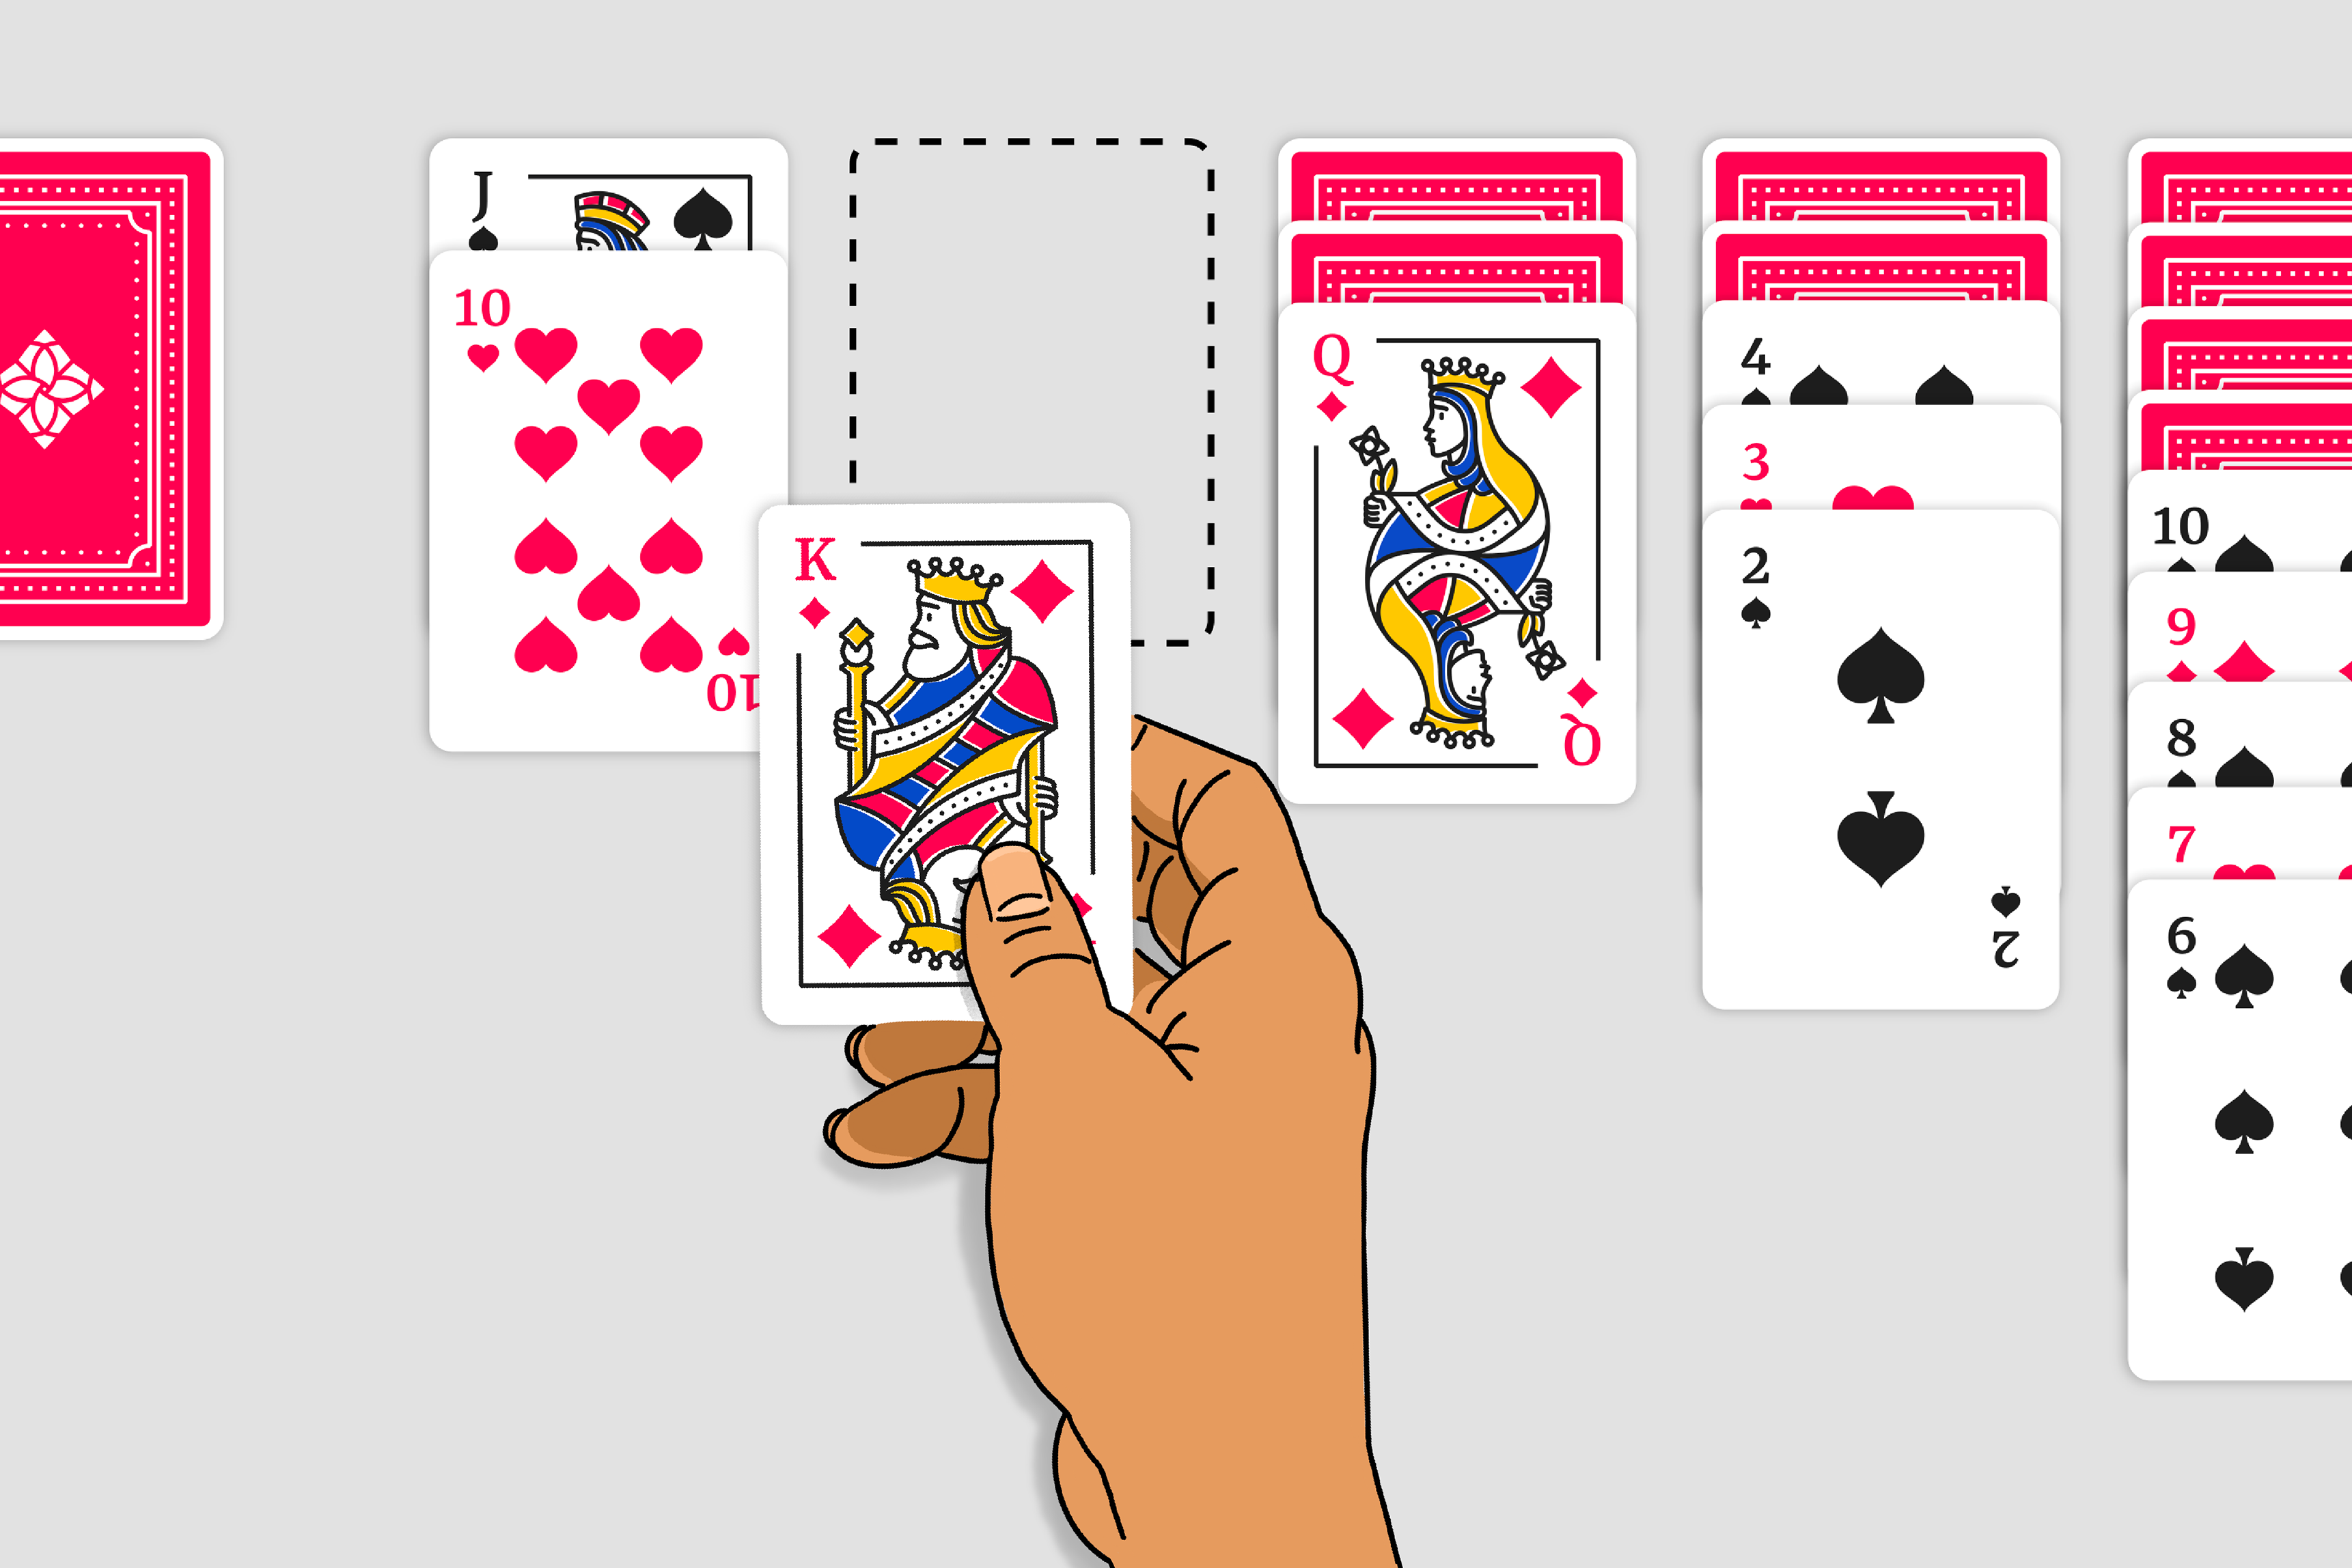 Geniet fusie zwaan How to play Solitaire: Illustrated card game guide for beginners